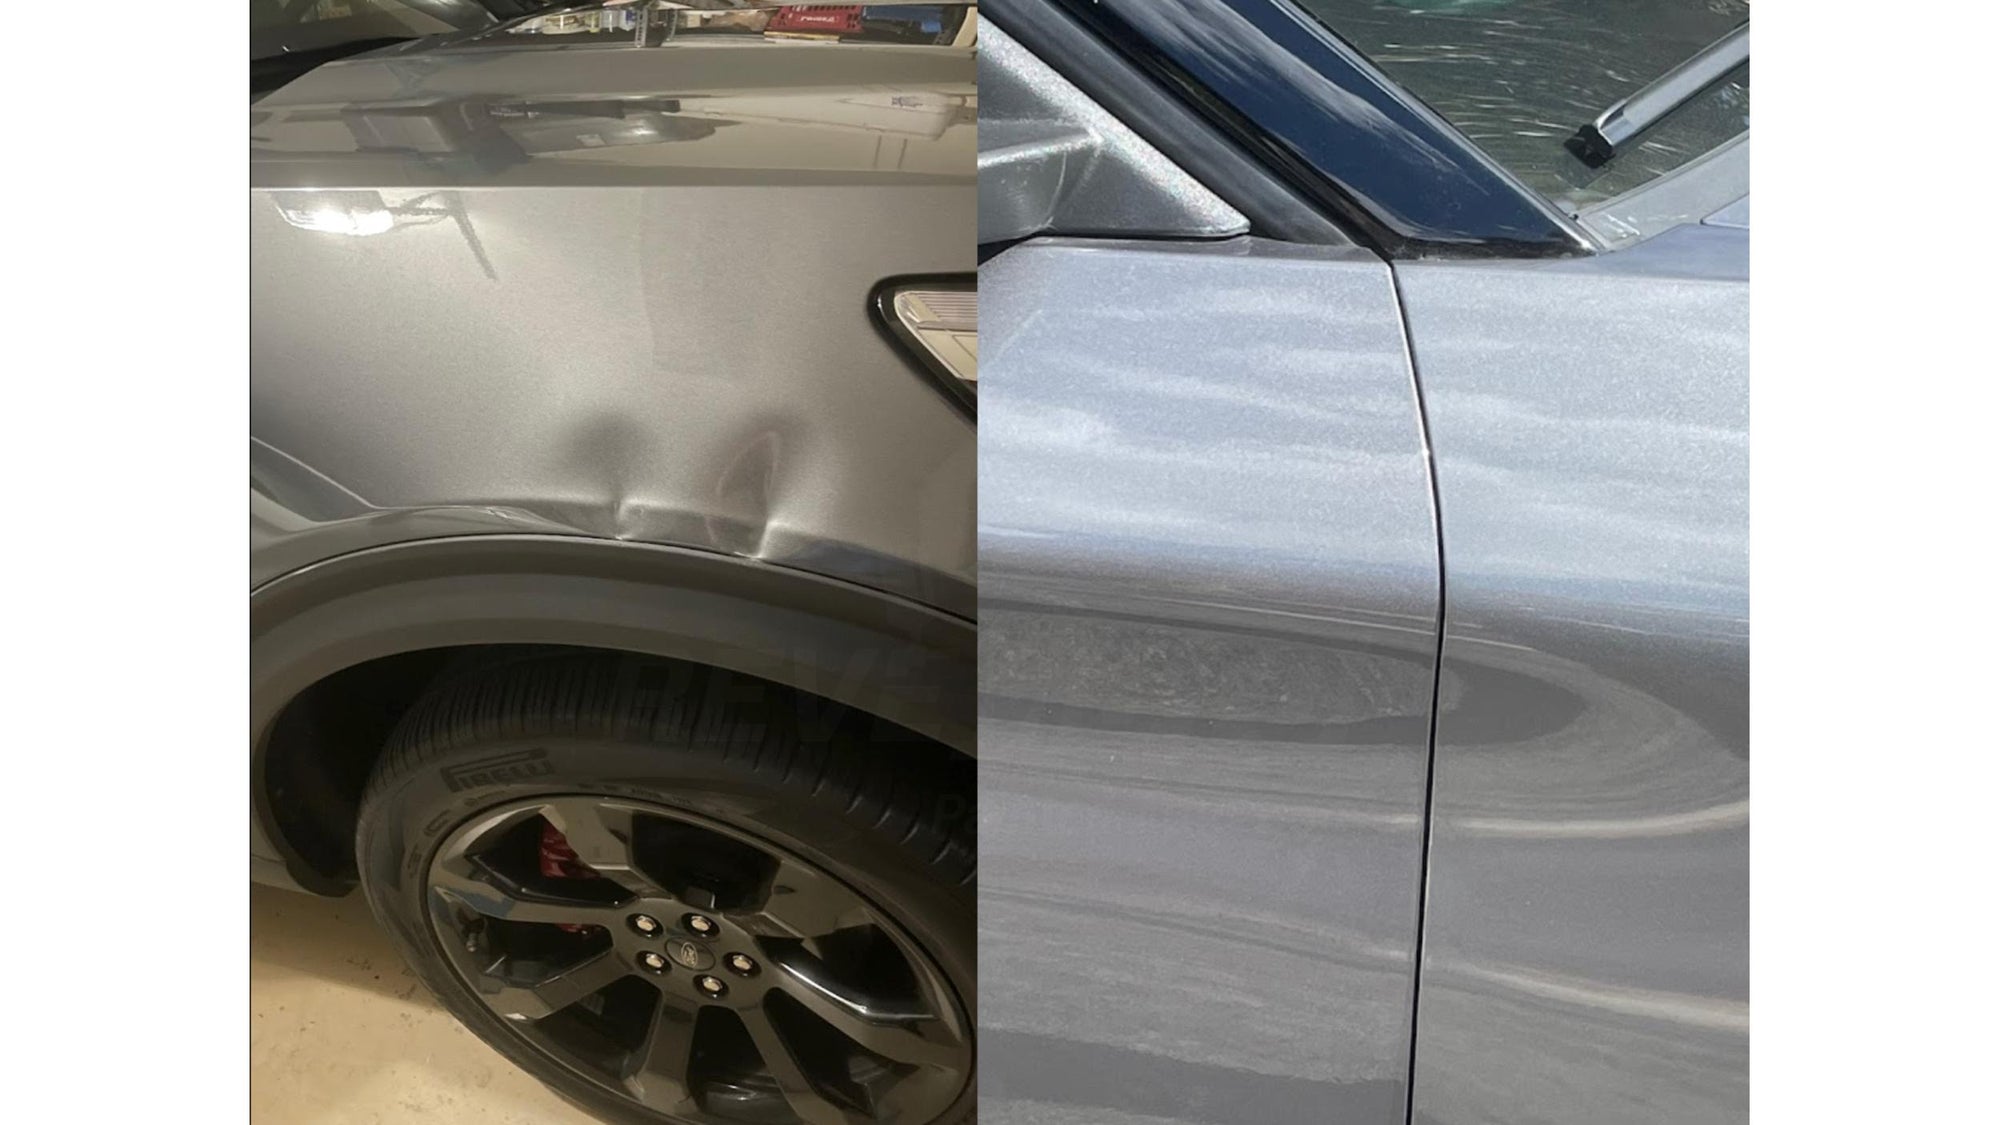 22737 - 2020-2023 Ford Explorer Fender Passenger-Side Carbonized Gray Metallic (M7) LB5Z16005A Before and After